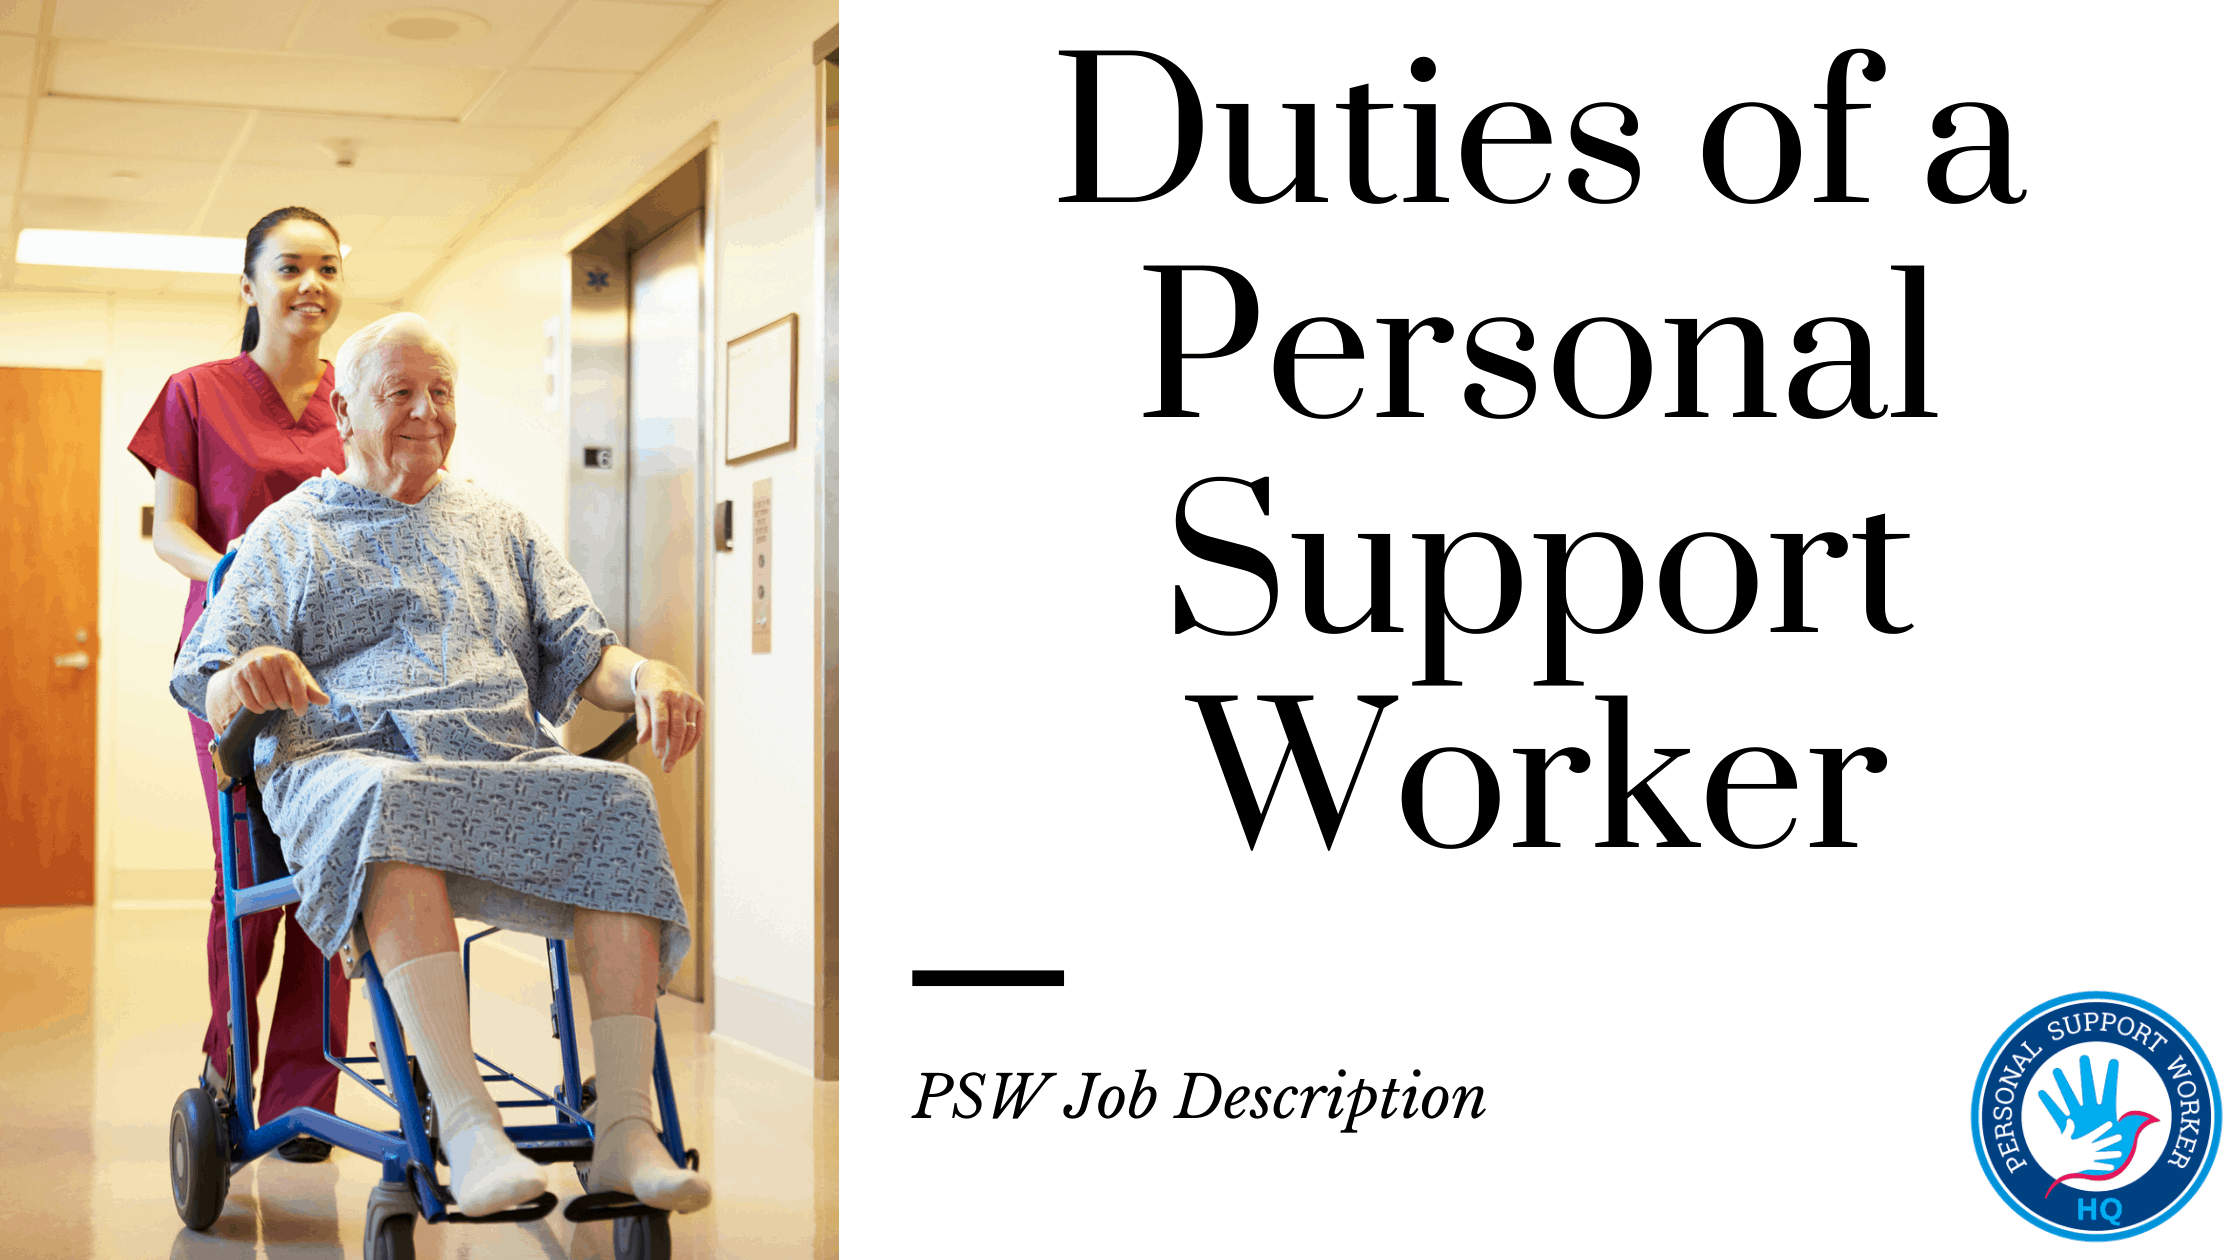 Duties of a Personal Support Worker